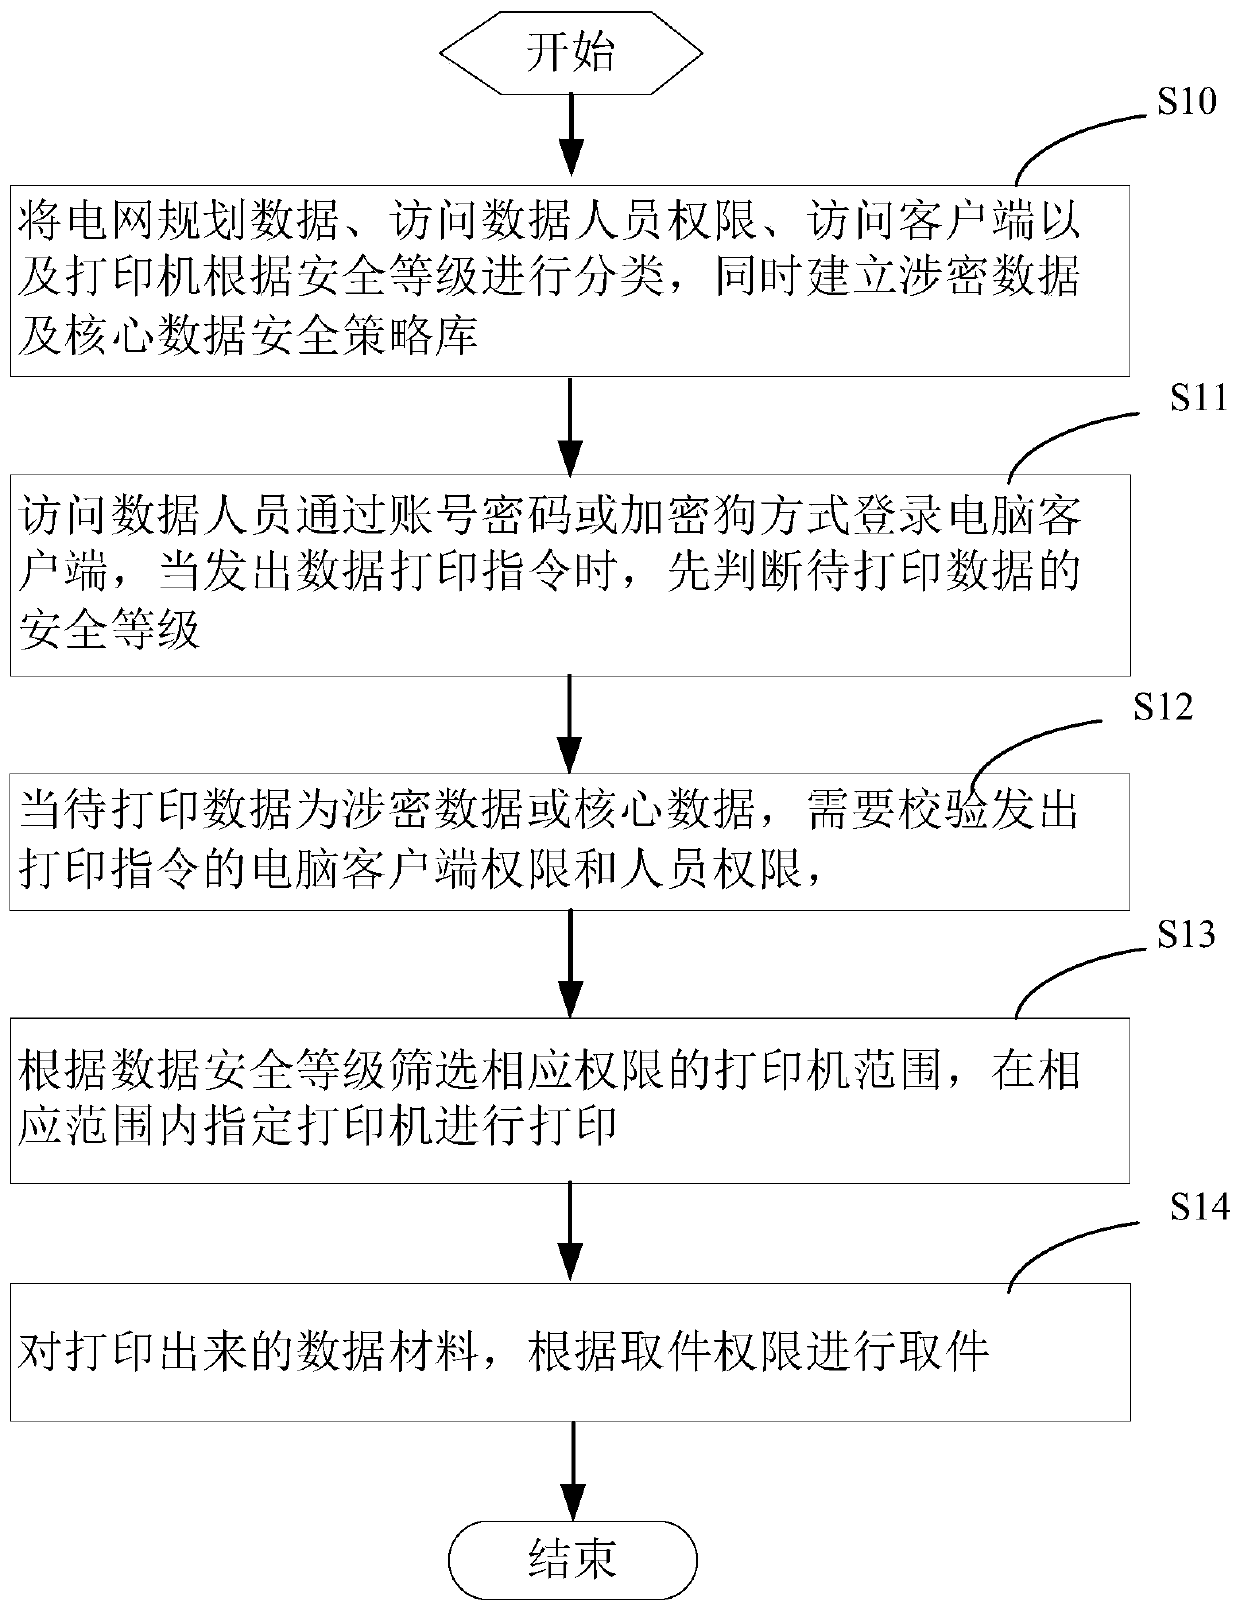 Power grid planning data security printing method and system